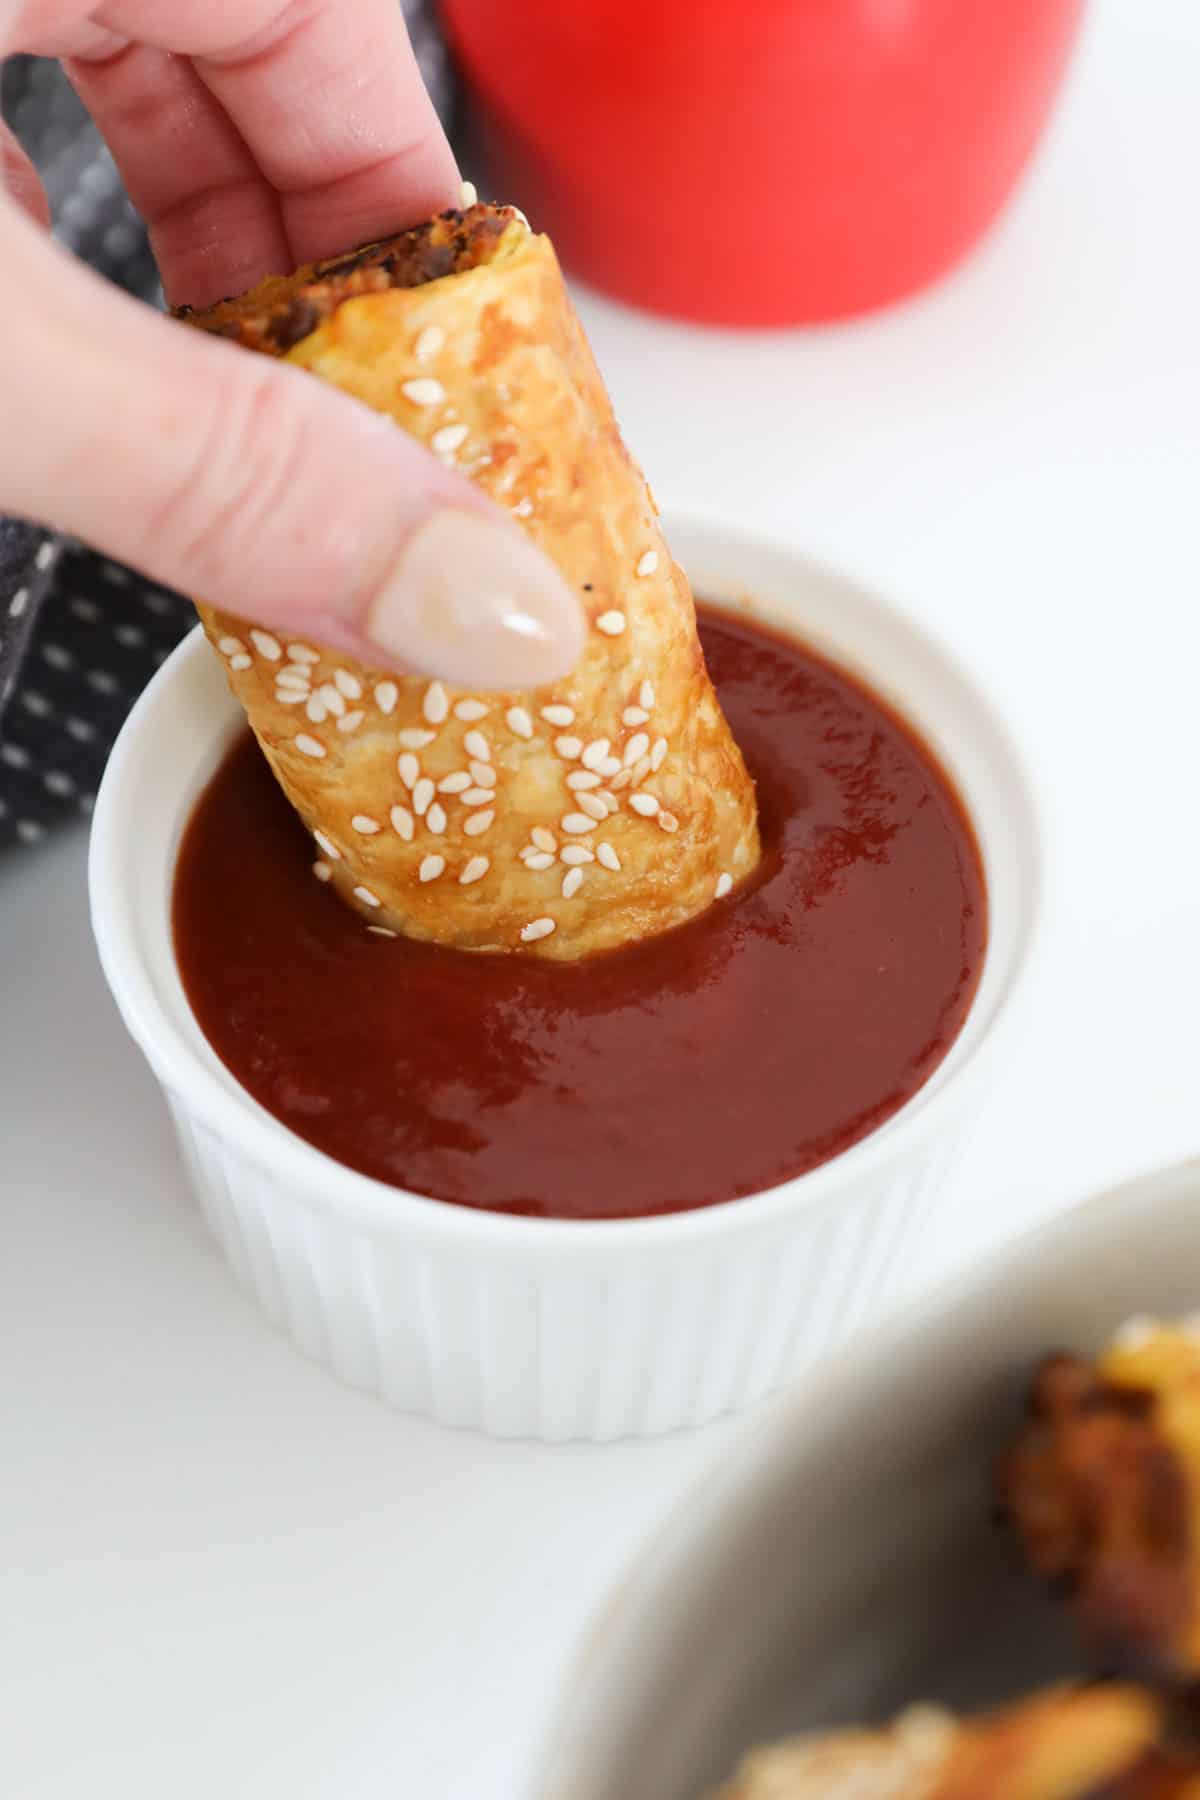 A vegetarian sausage roll being dipped into a small bowl of tomato sauce.